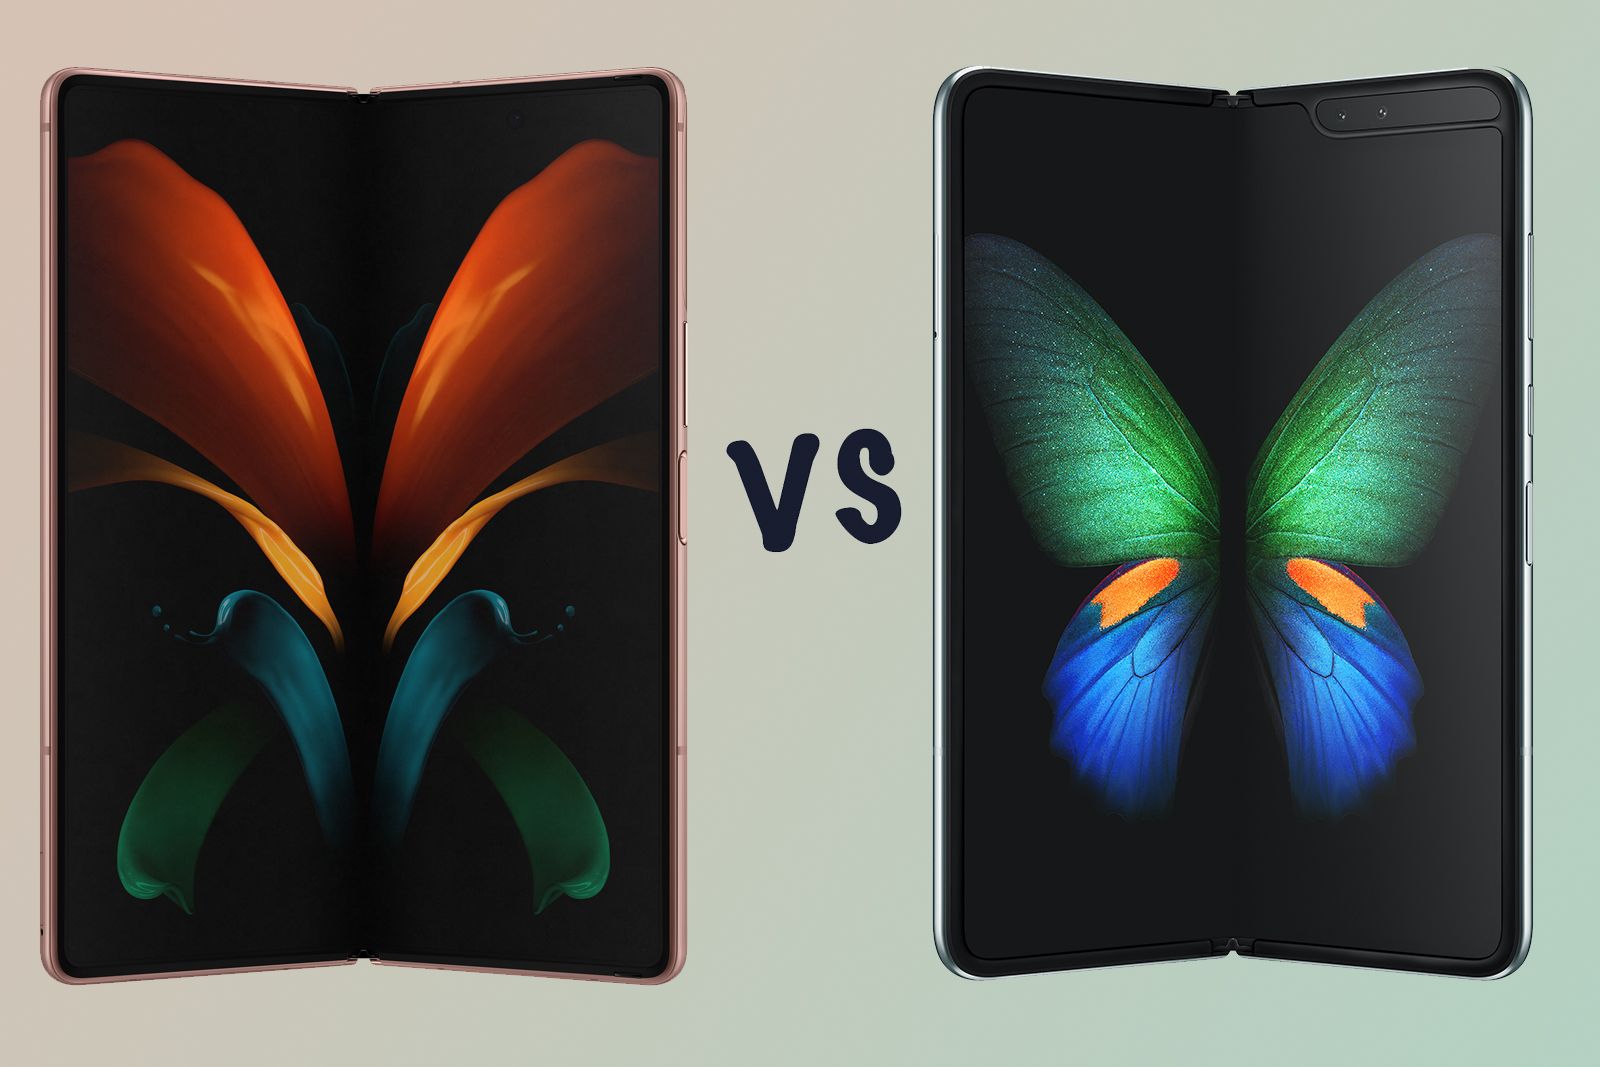 Samsung Galaxy Z Fold 2 vs Galaxy Fold: What's the difference? photo 2